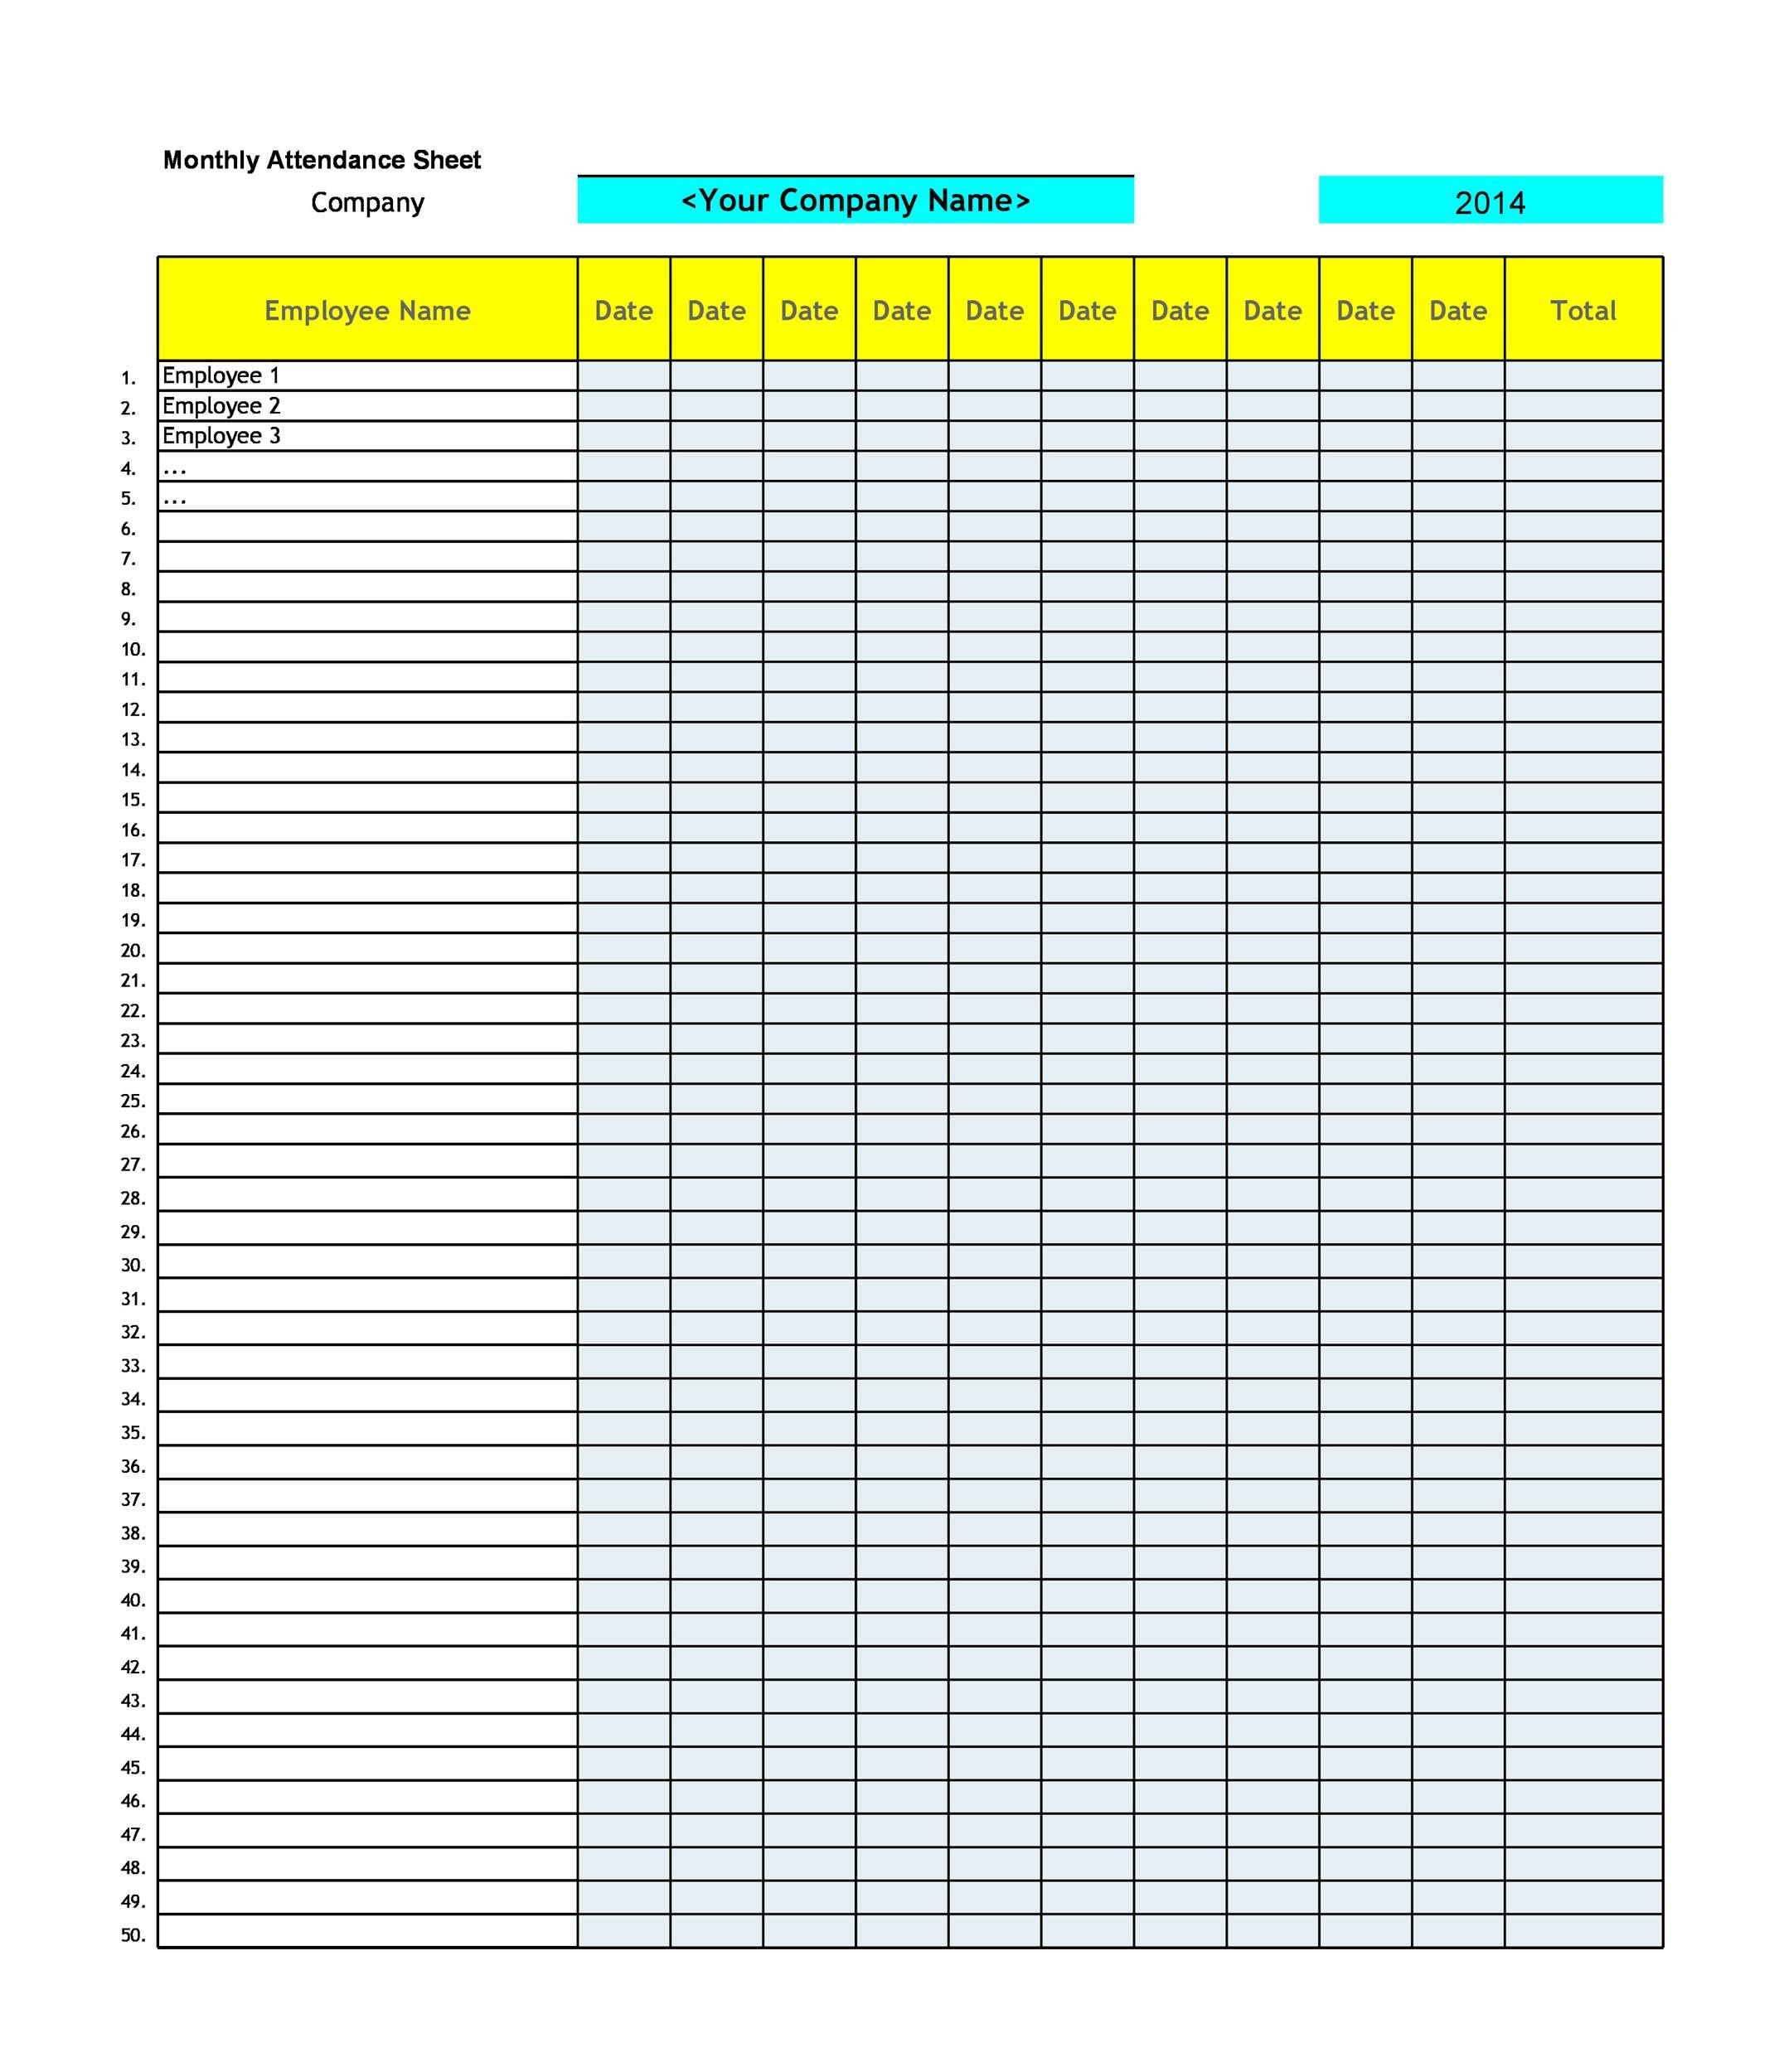 Monthly Attendance Sheet Template Excel For Employee Hq Printable